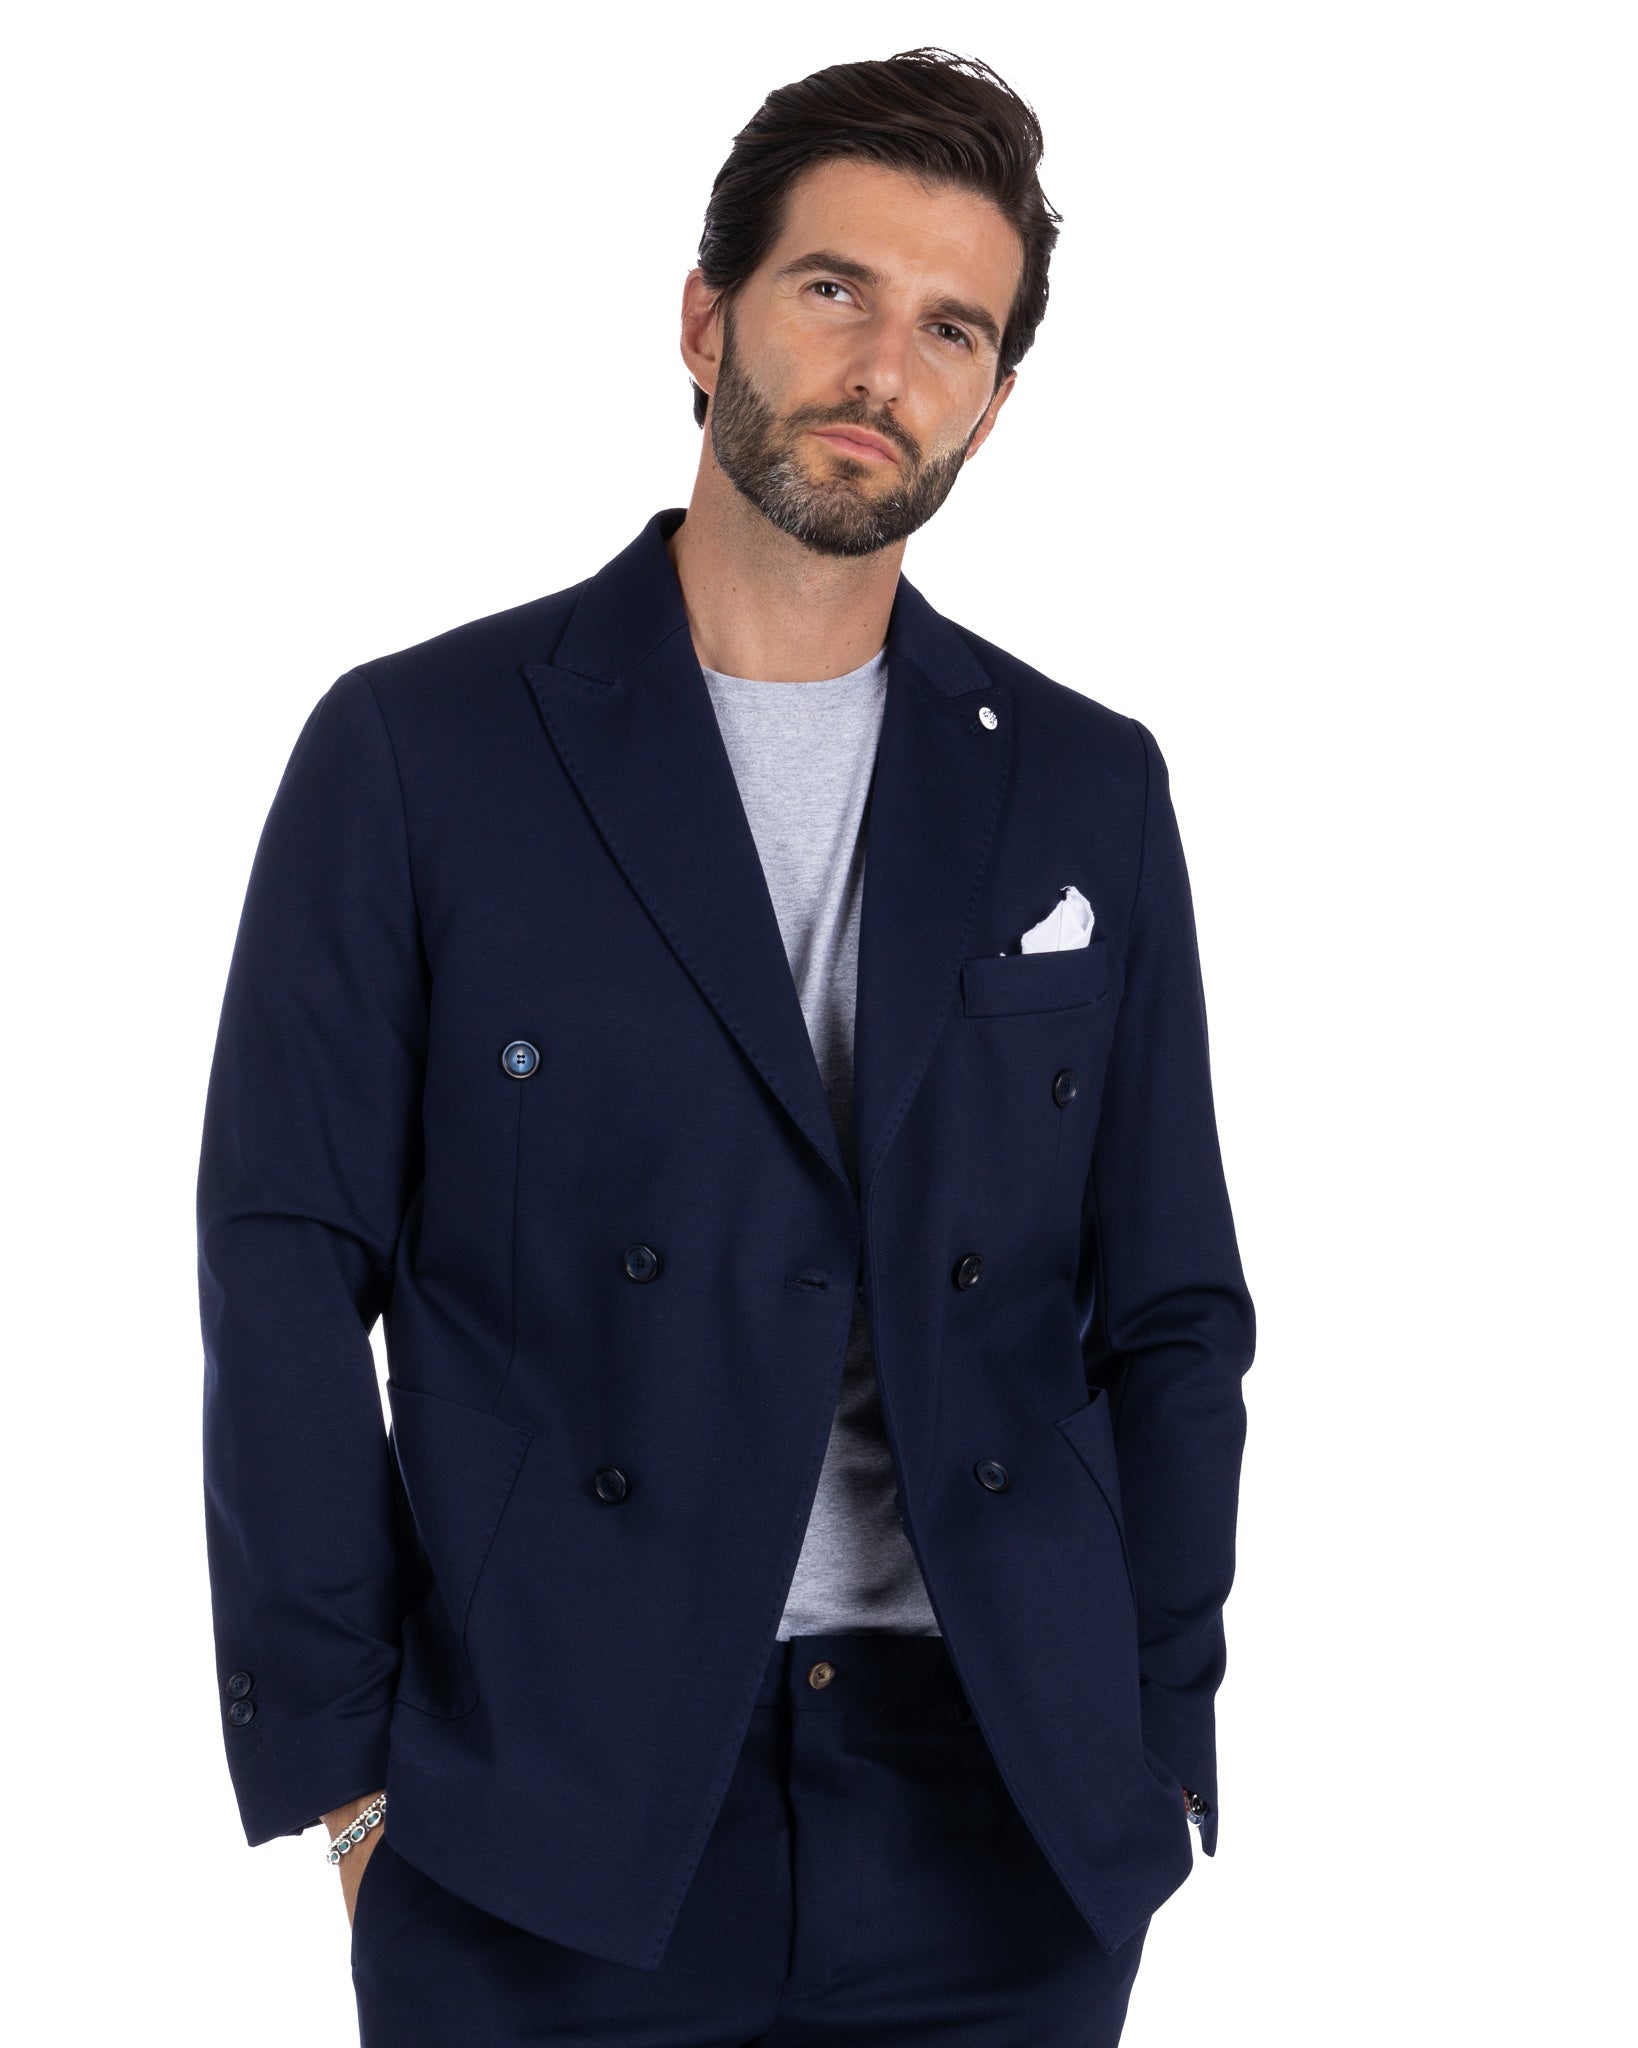 Mustang - blue milan stitch double-breasted jacket